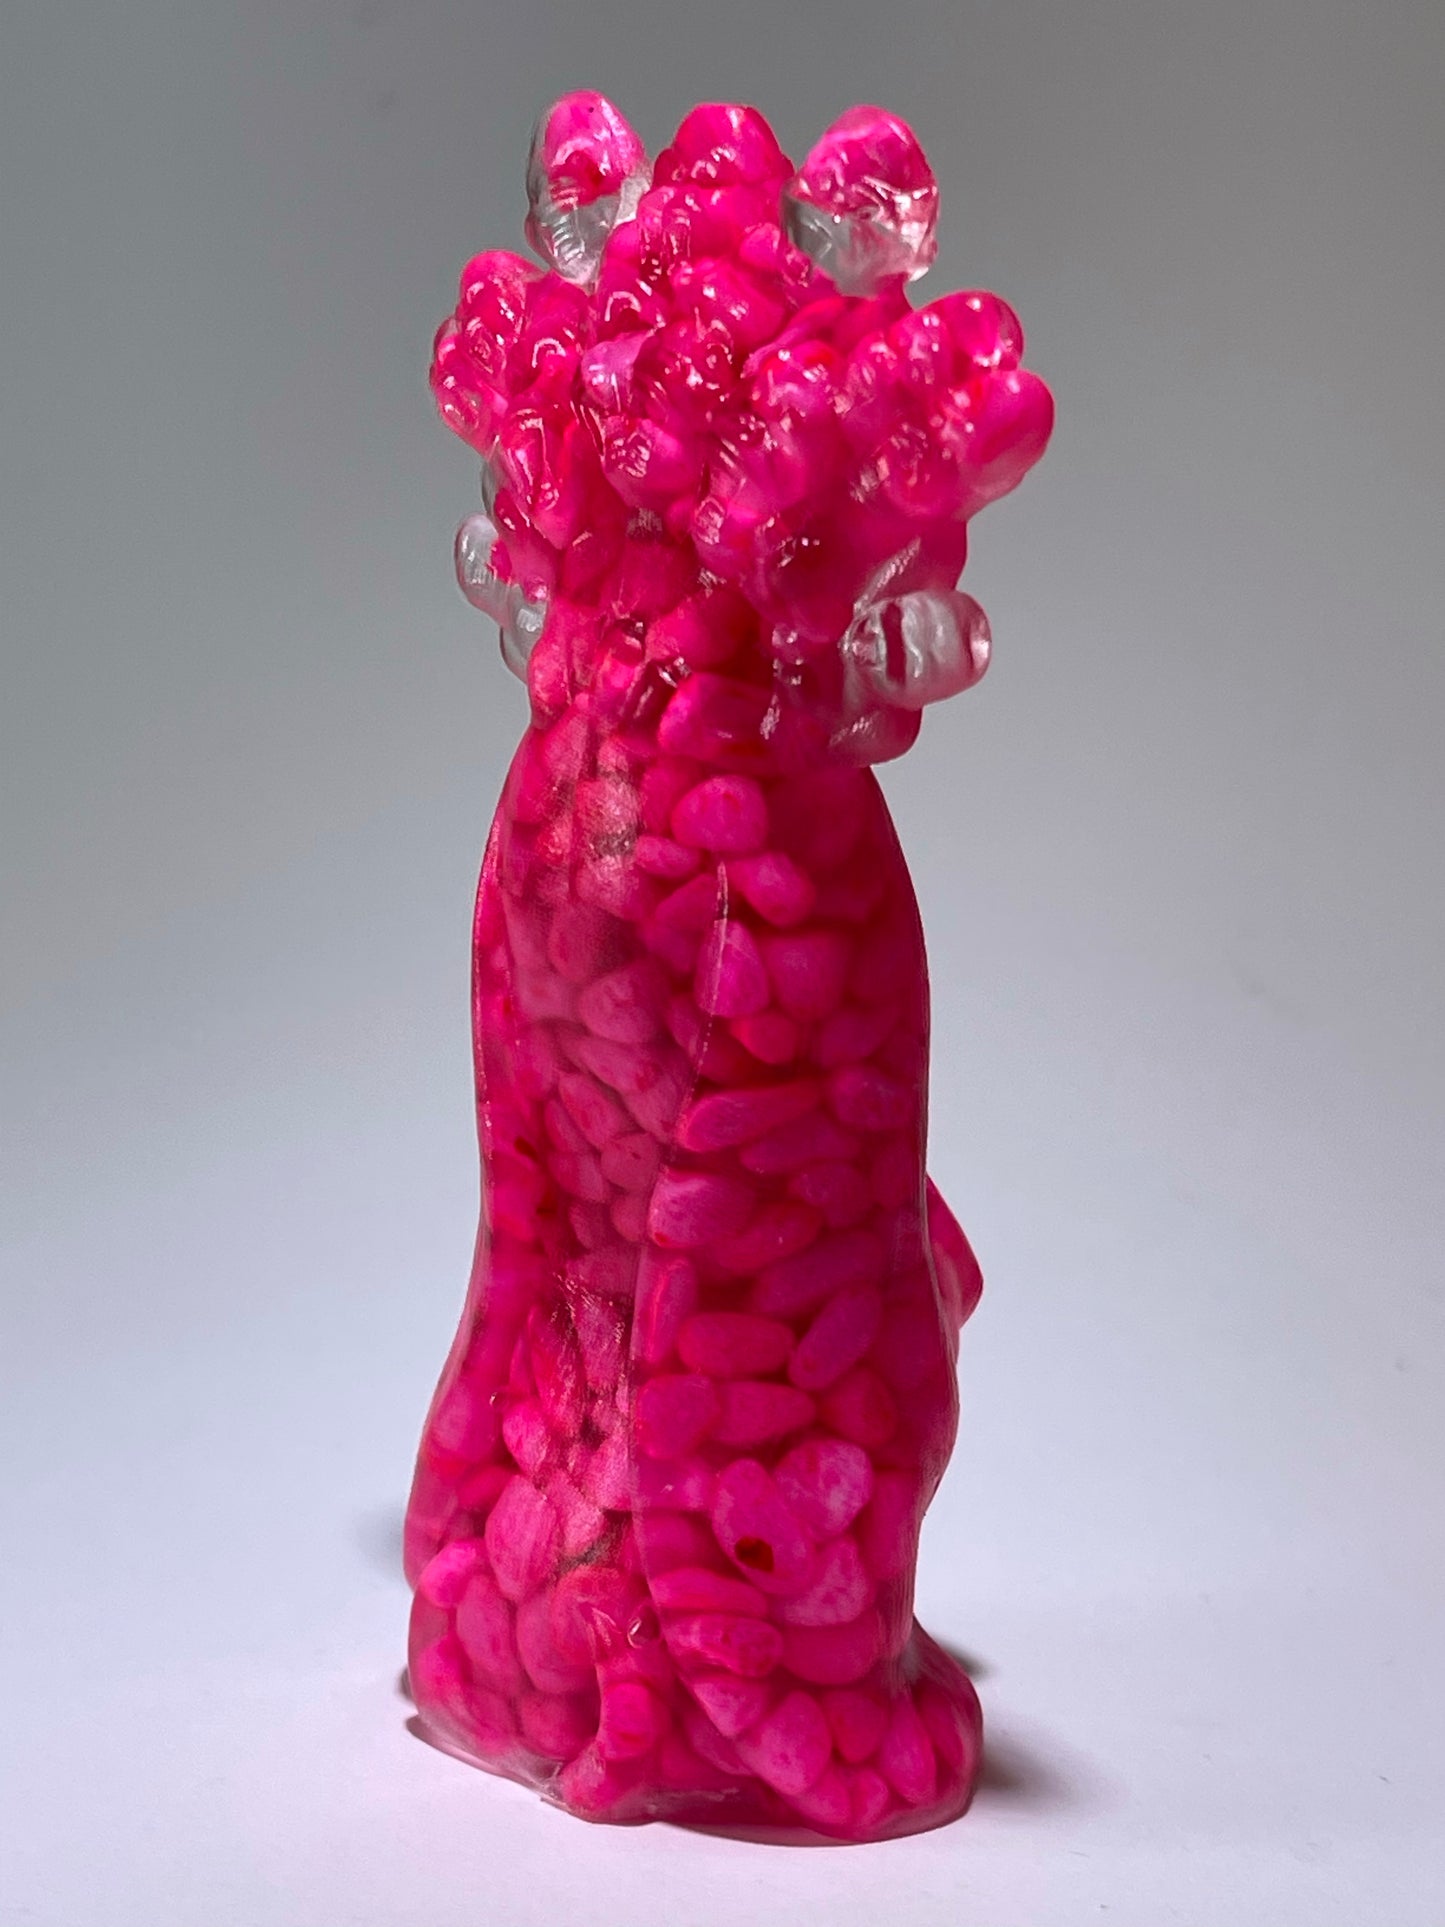 His Majesty, the King: Resin Cast with Pink Stones